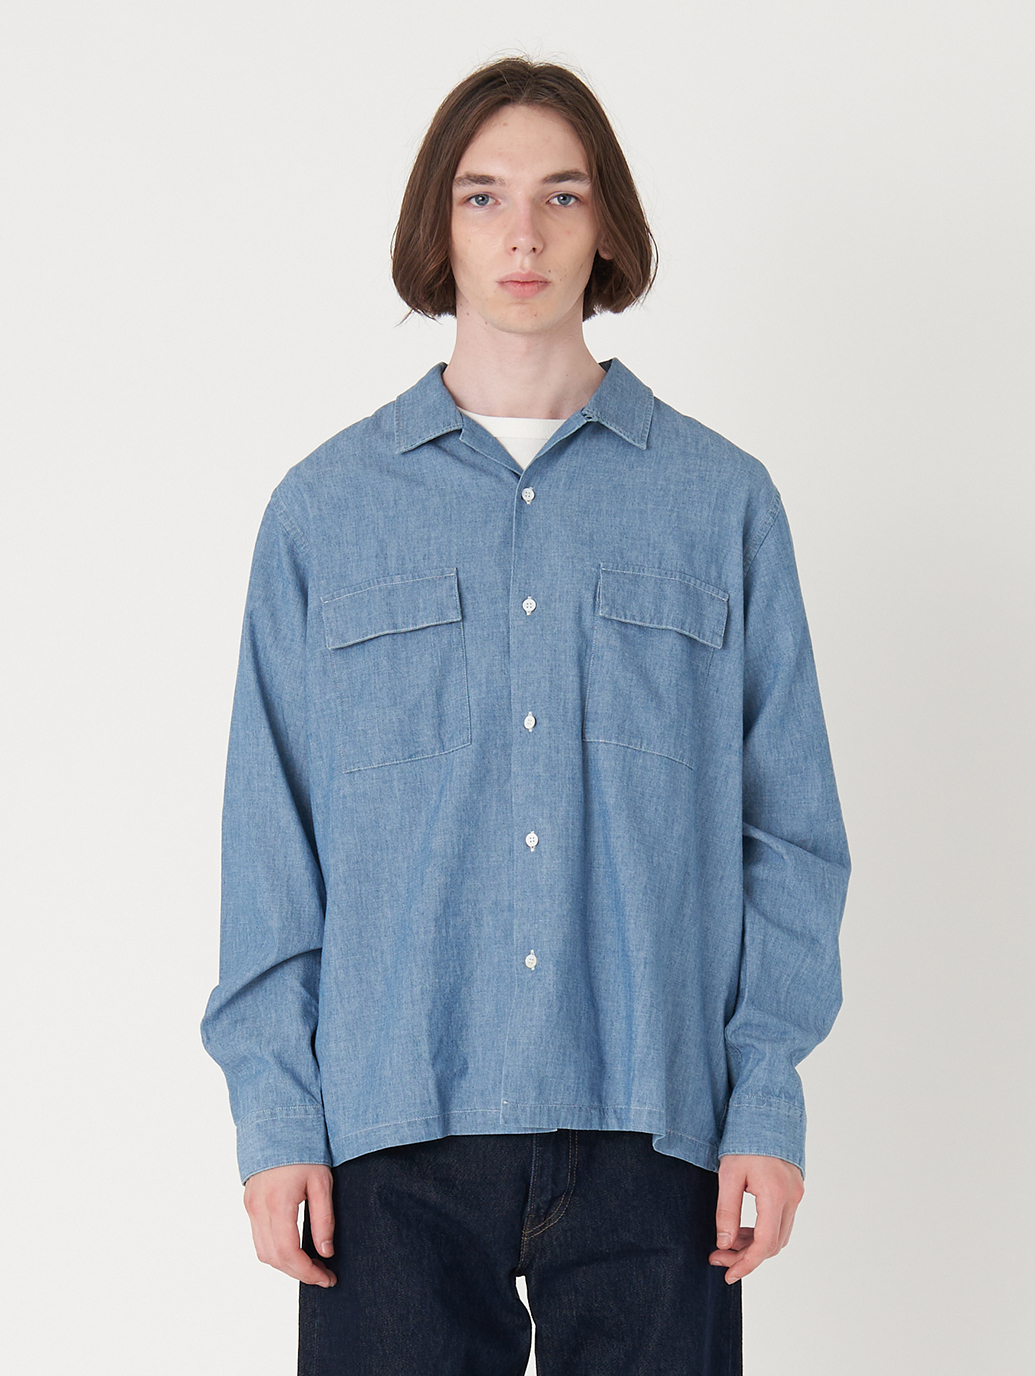 Levi's® Denim FamilyBY LEVI'S® MADE&CRAFTED® シャンブレー